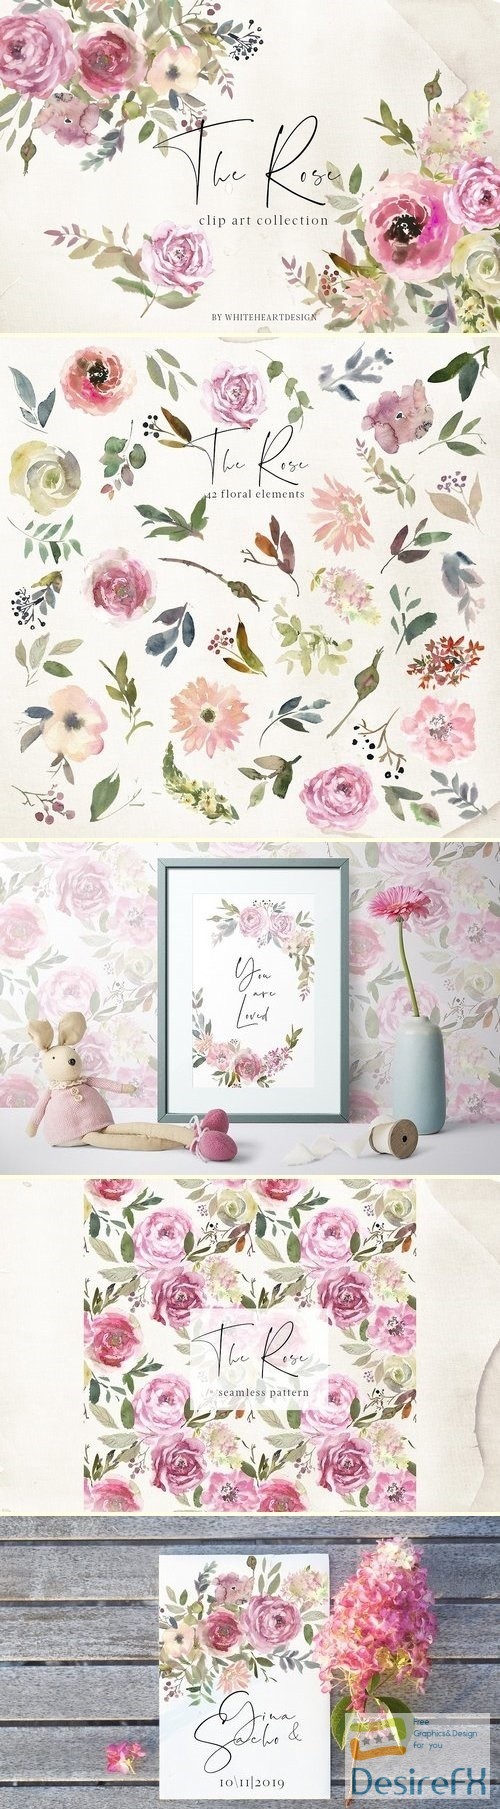 The Rose Watercolor Floral Clipart - 2888705